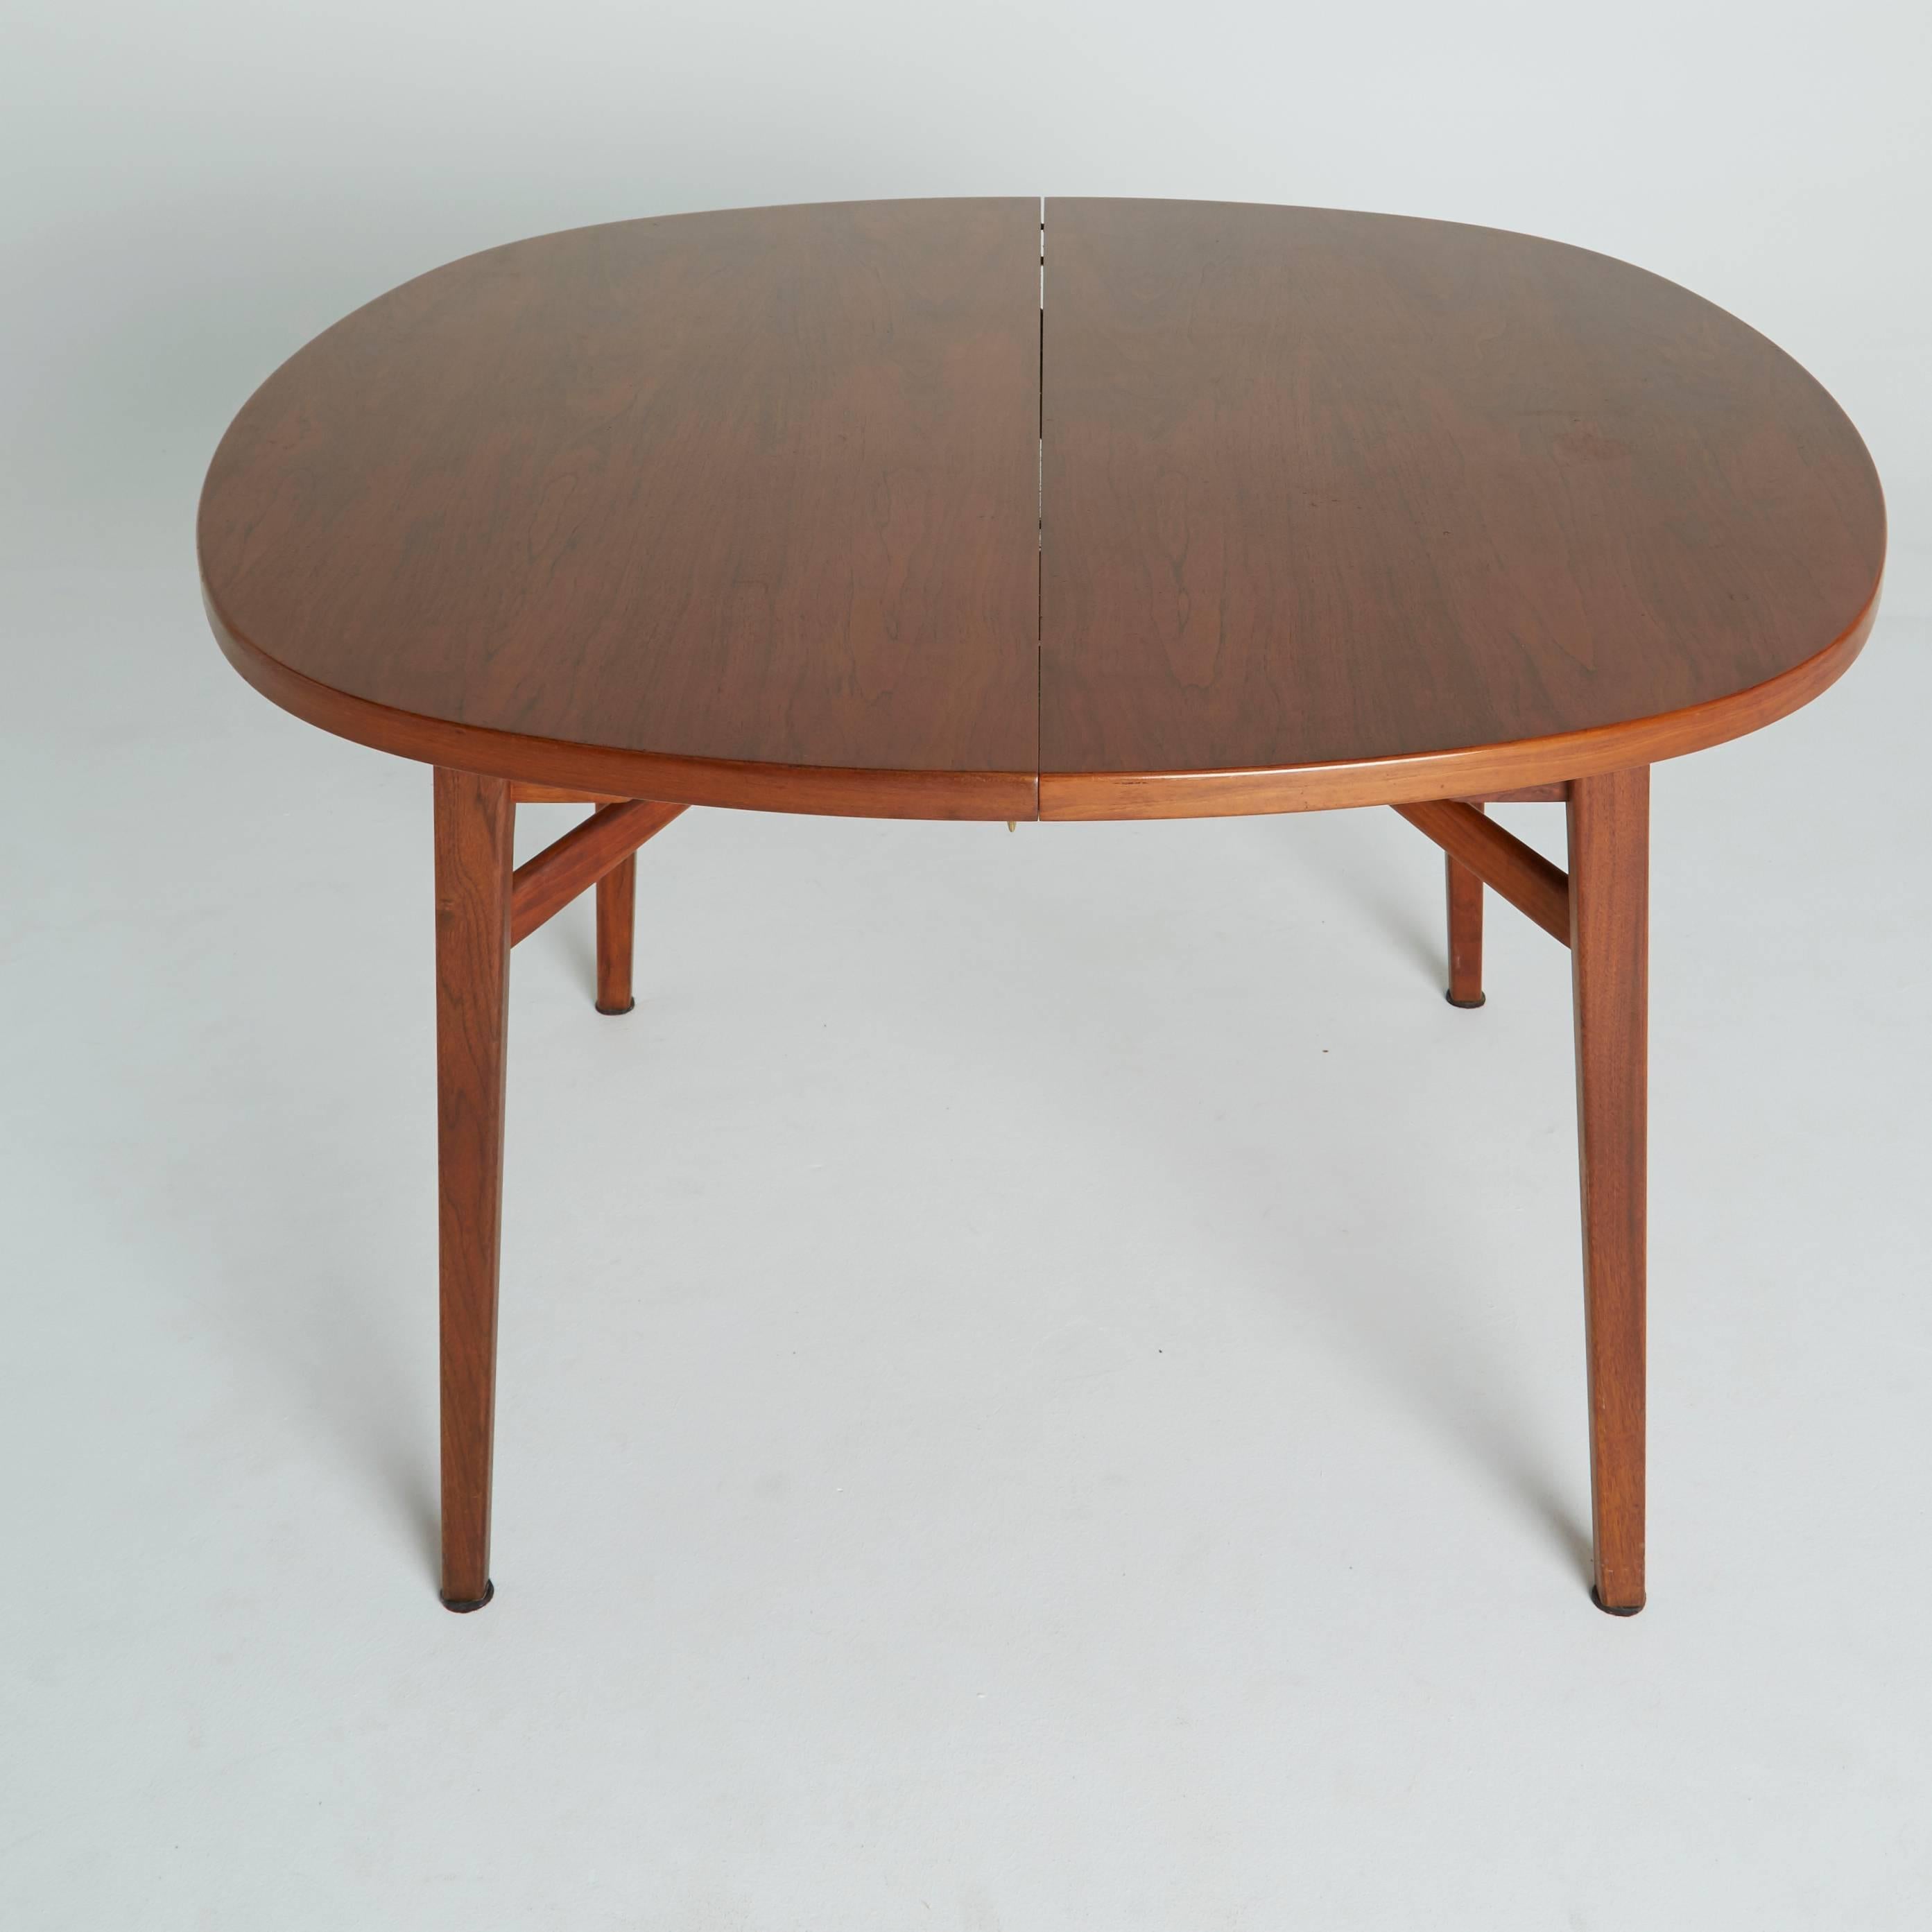 When compact, this round Jens Risom dining table is the perfect size for a quaint breakfast nook, for gaming and for a dinner for your family and friends. Included are three (3) leafs, so this versatile table has three more size settings to